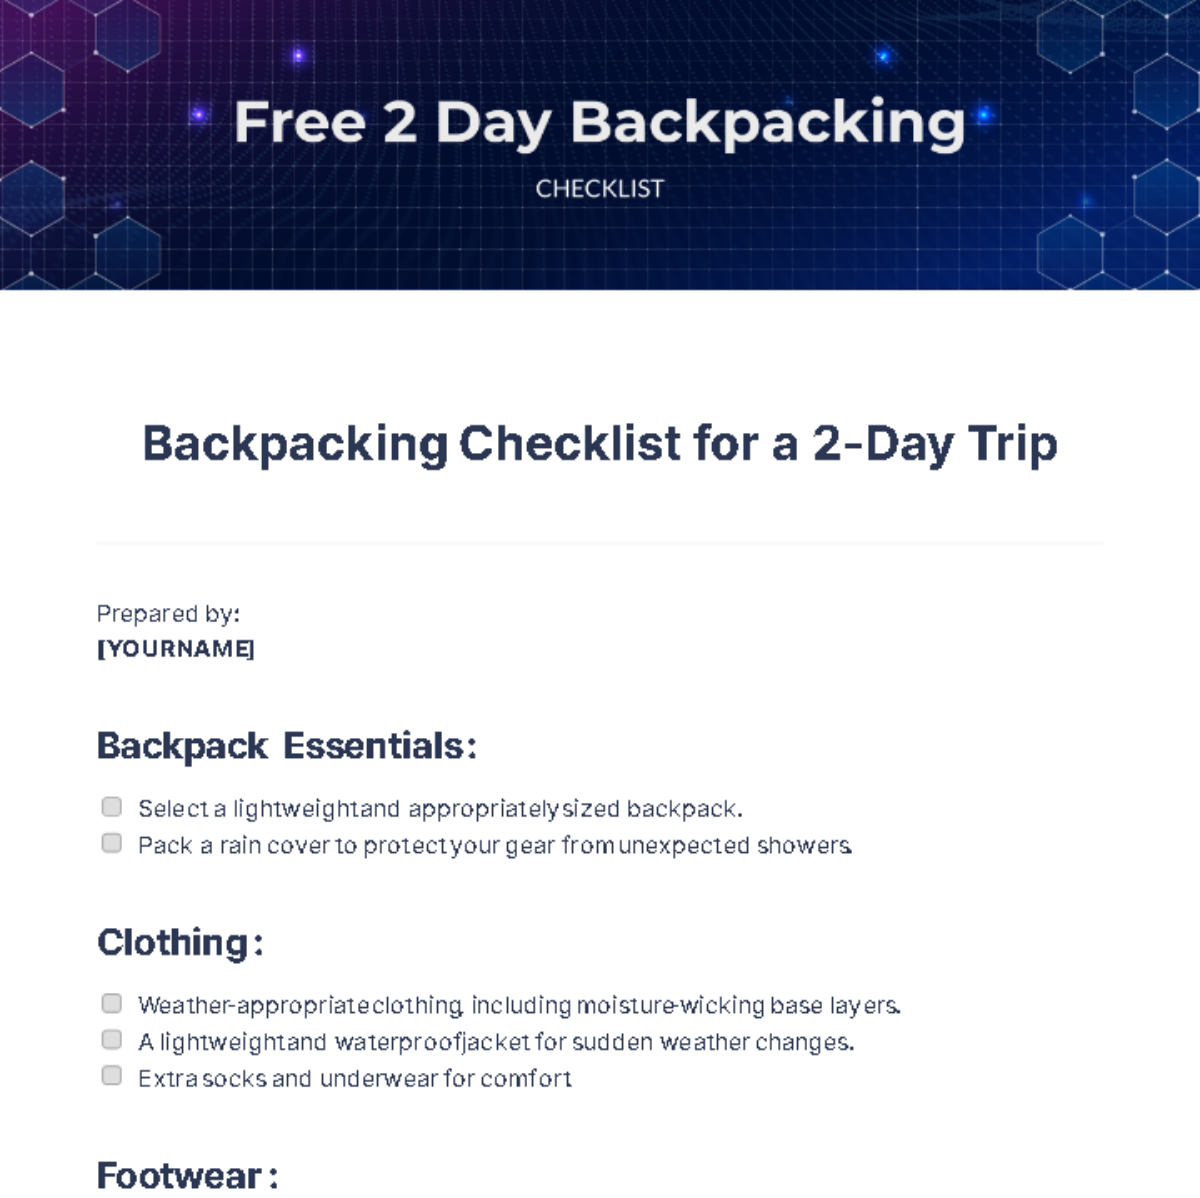 2 Day Backpacking Checklist Template